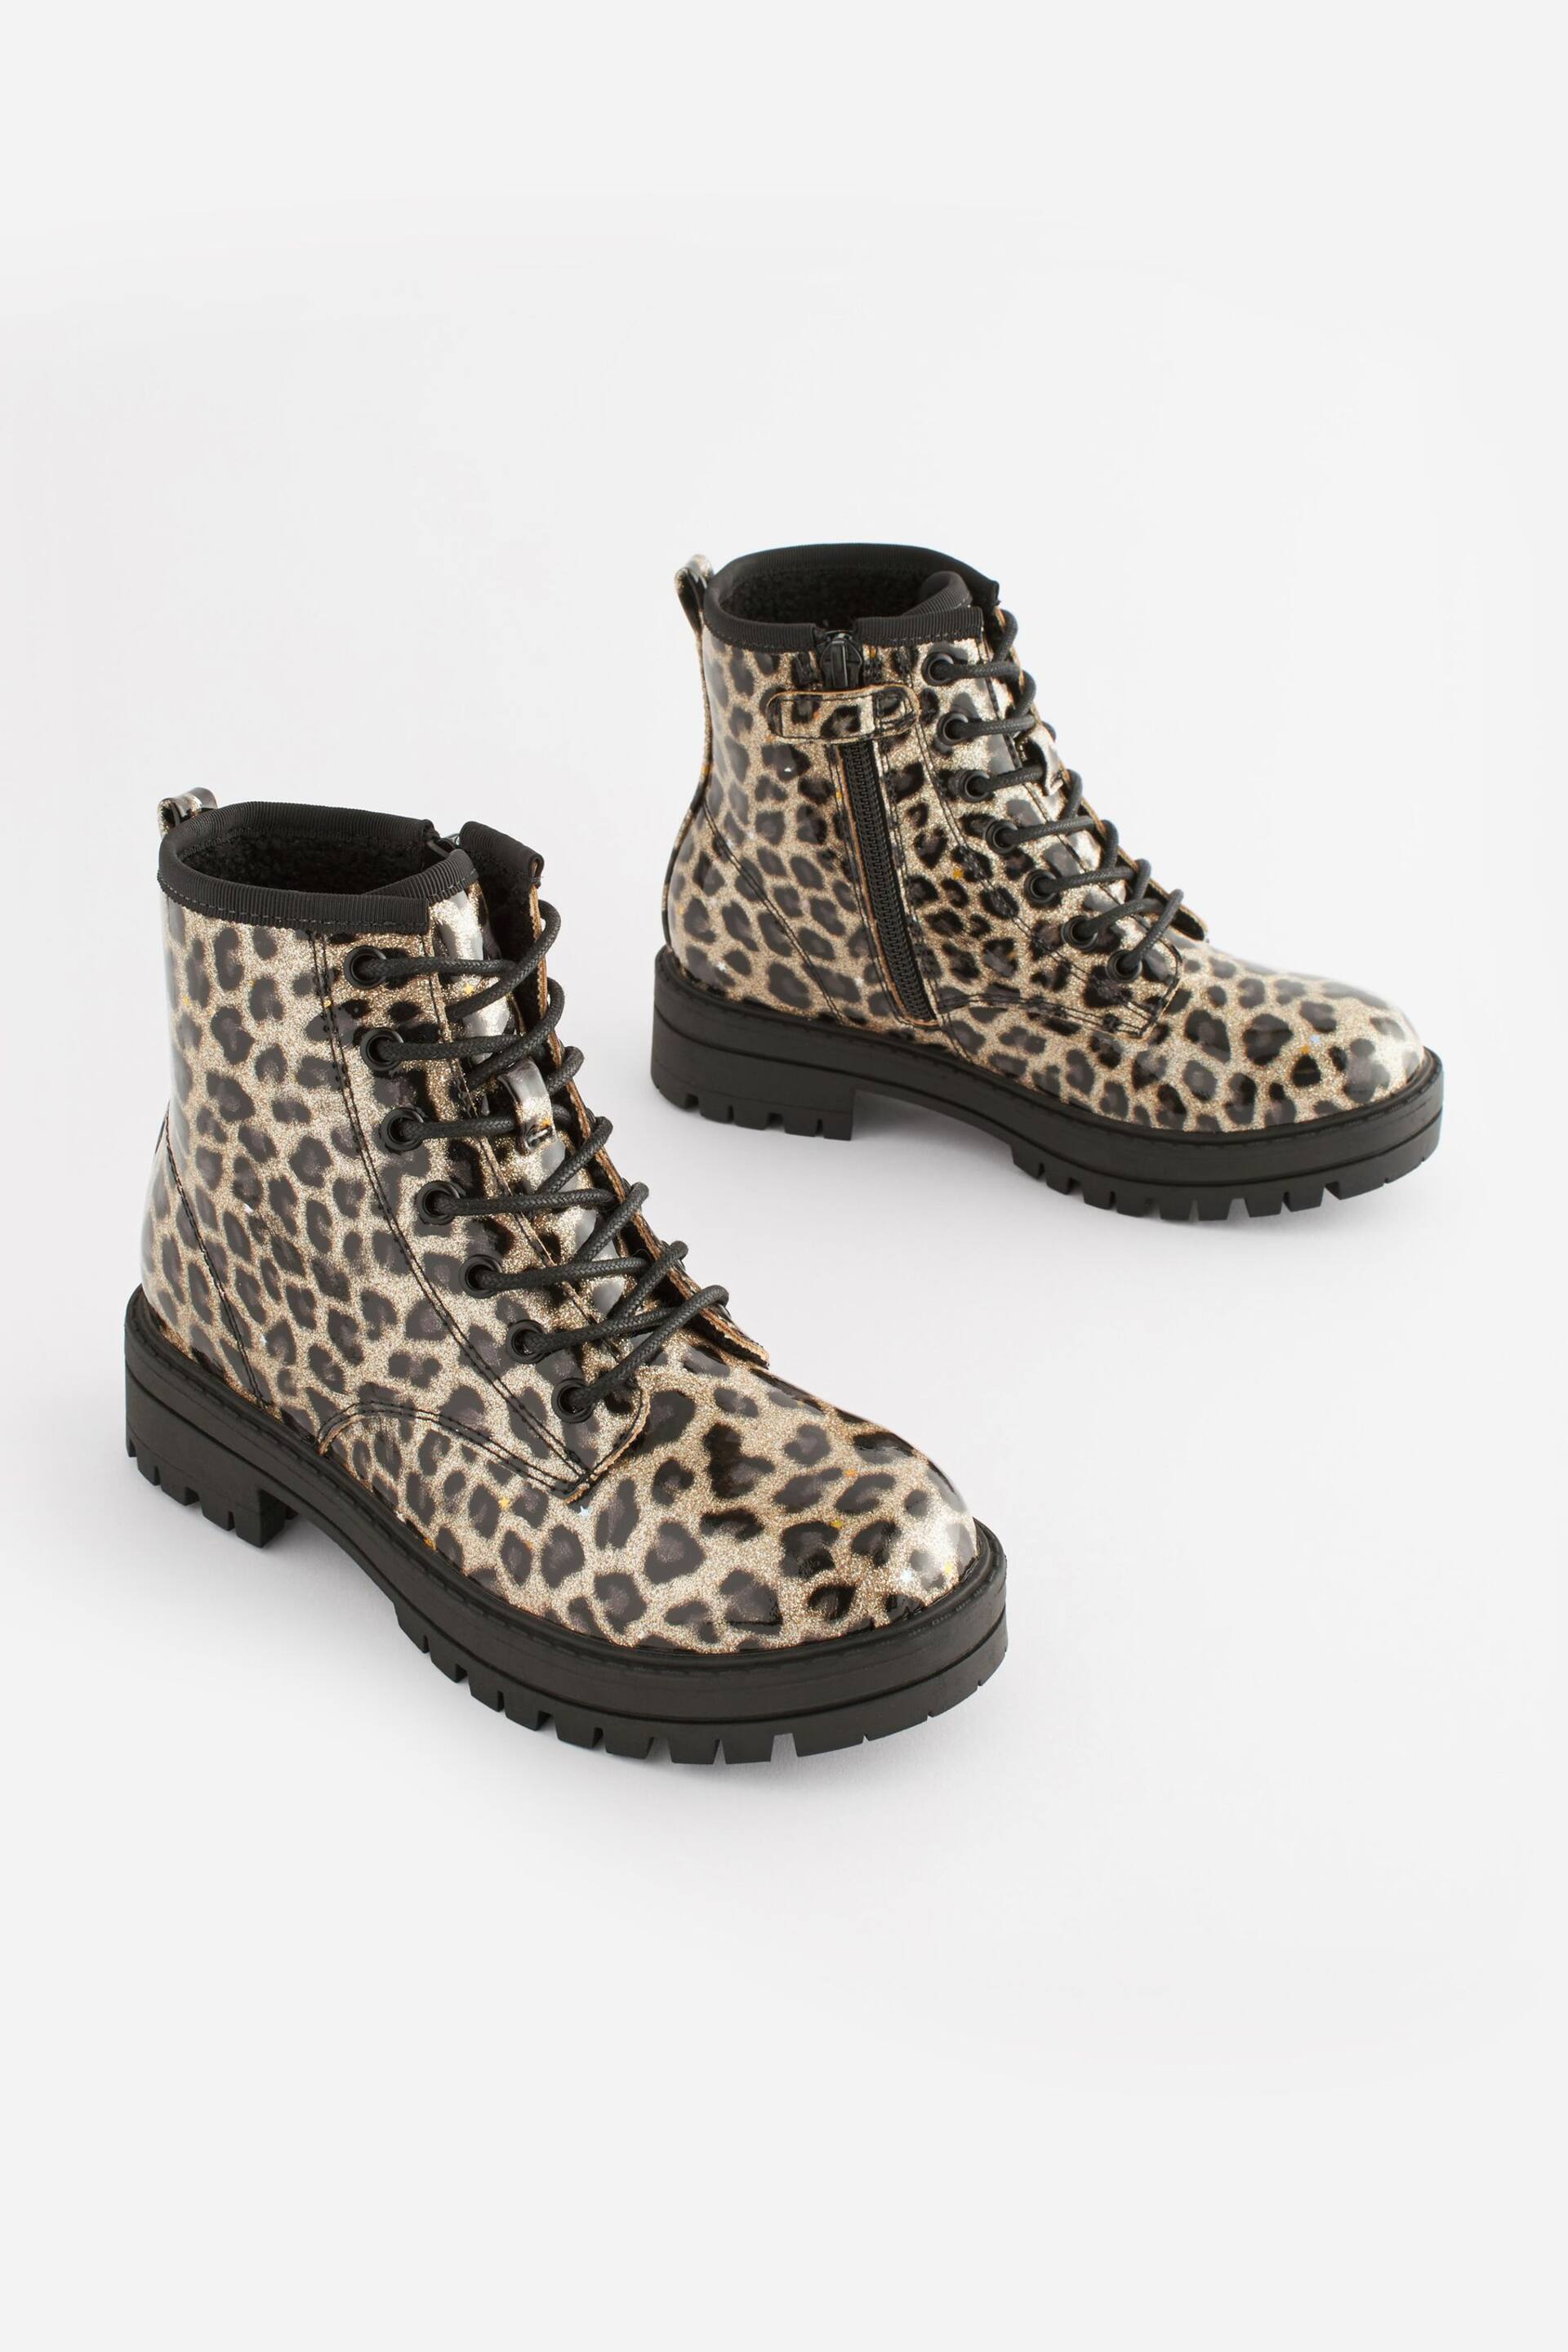 Leopard Print Standard Fit (F) Warm Lined Lace-Up Boots - Image 1 of 11